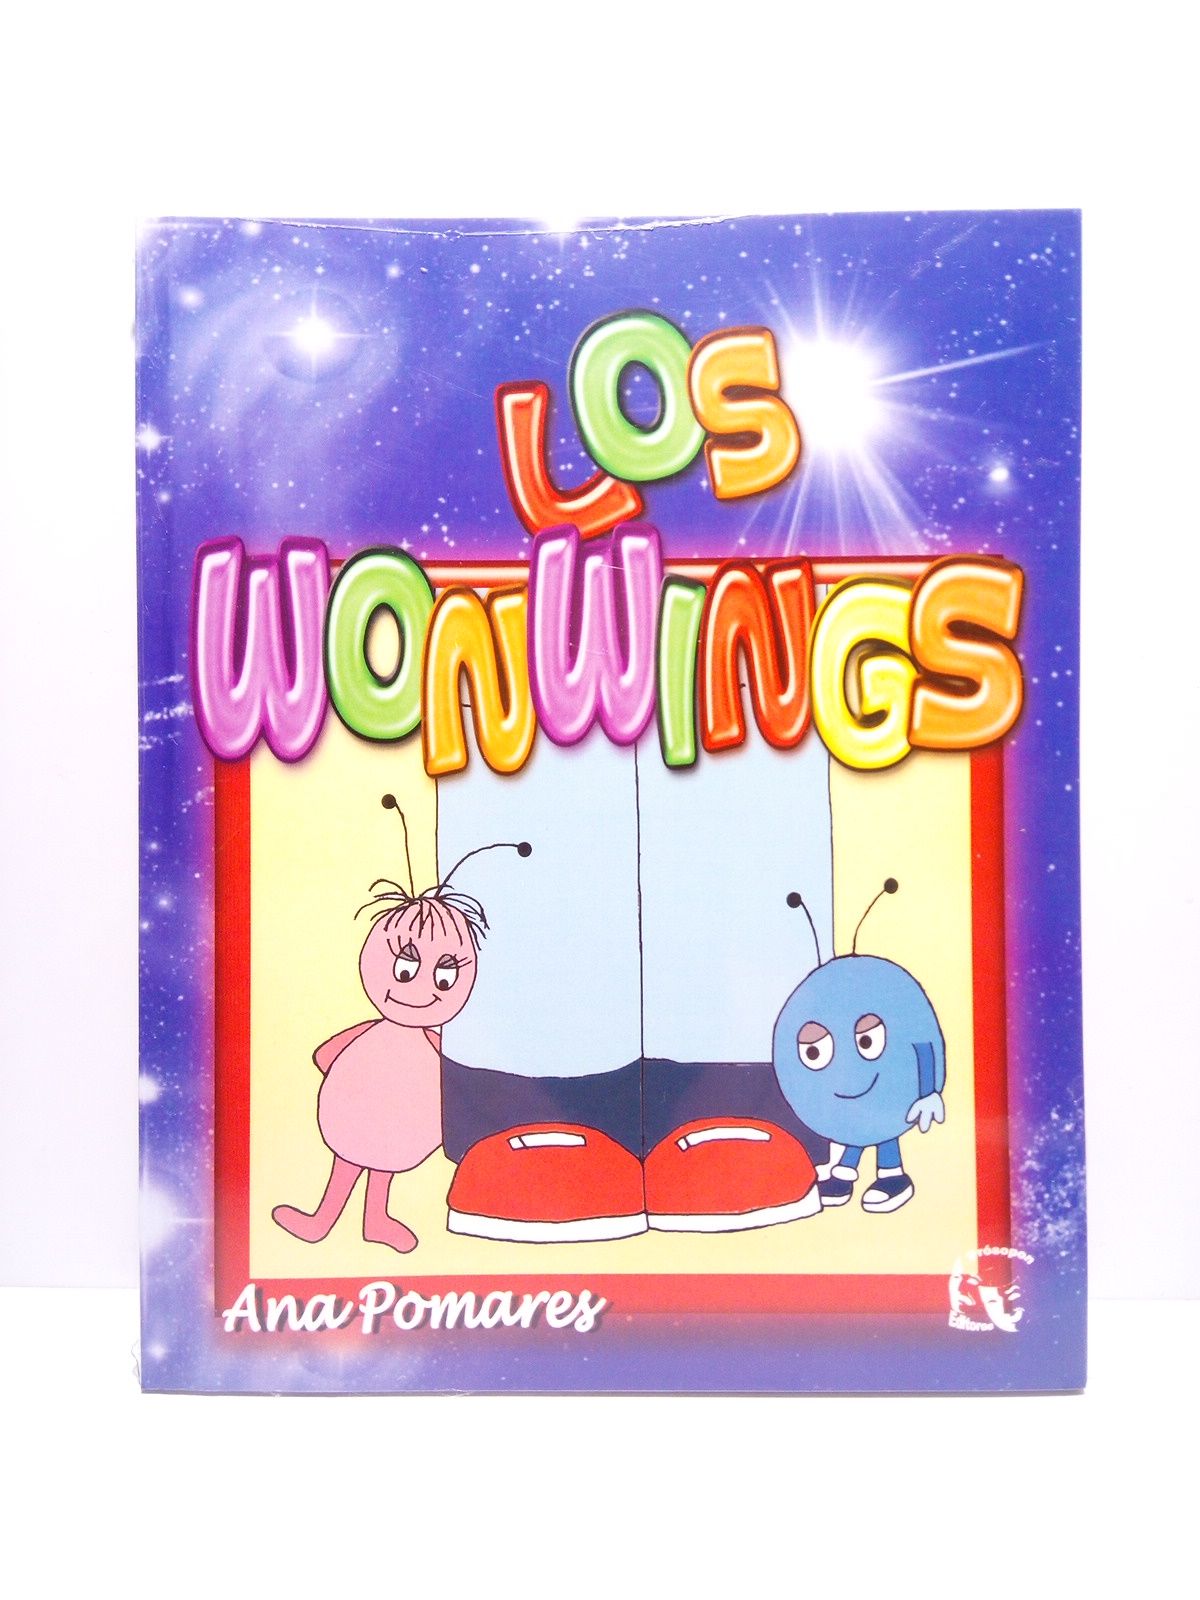 POMARES, Ana - Los Wonwings. (Cuento)